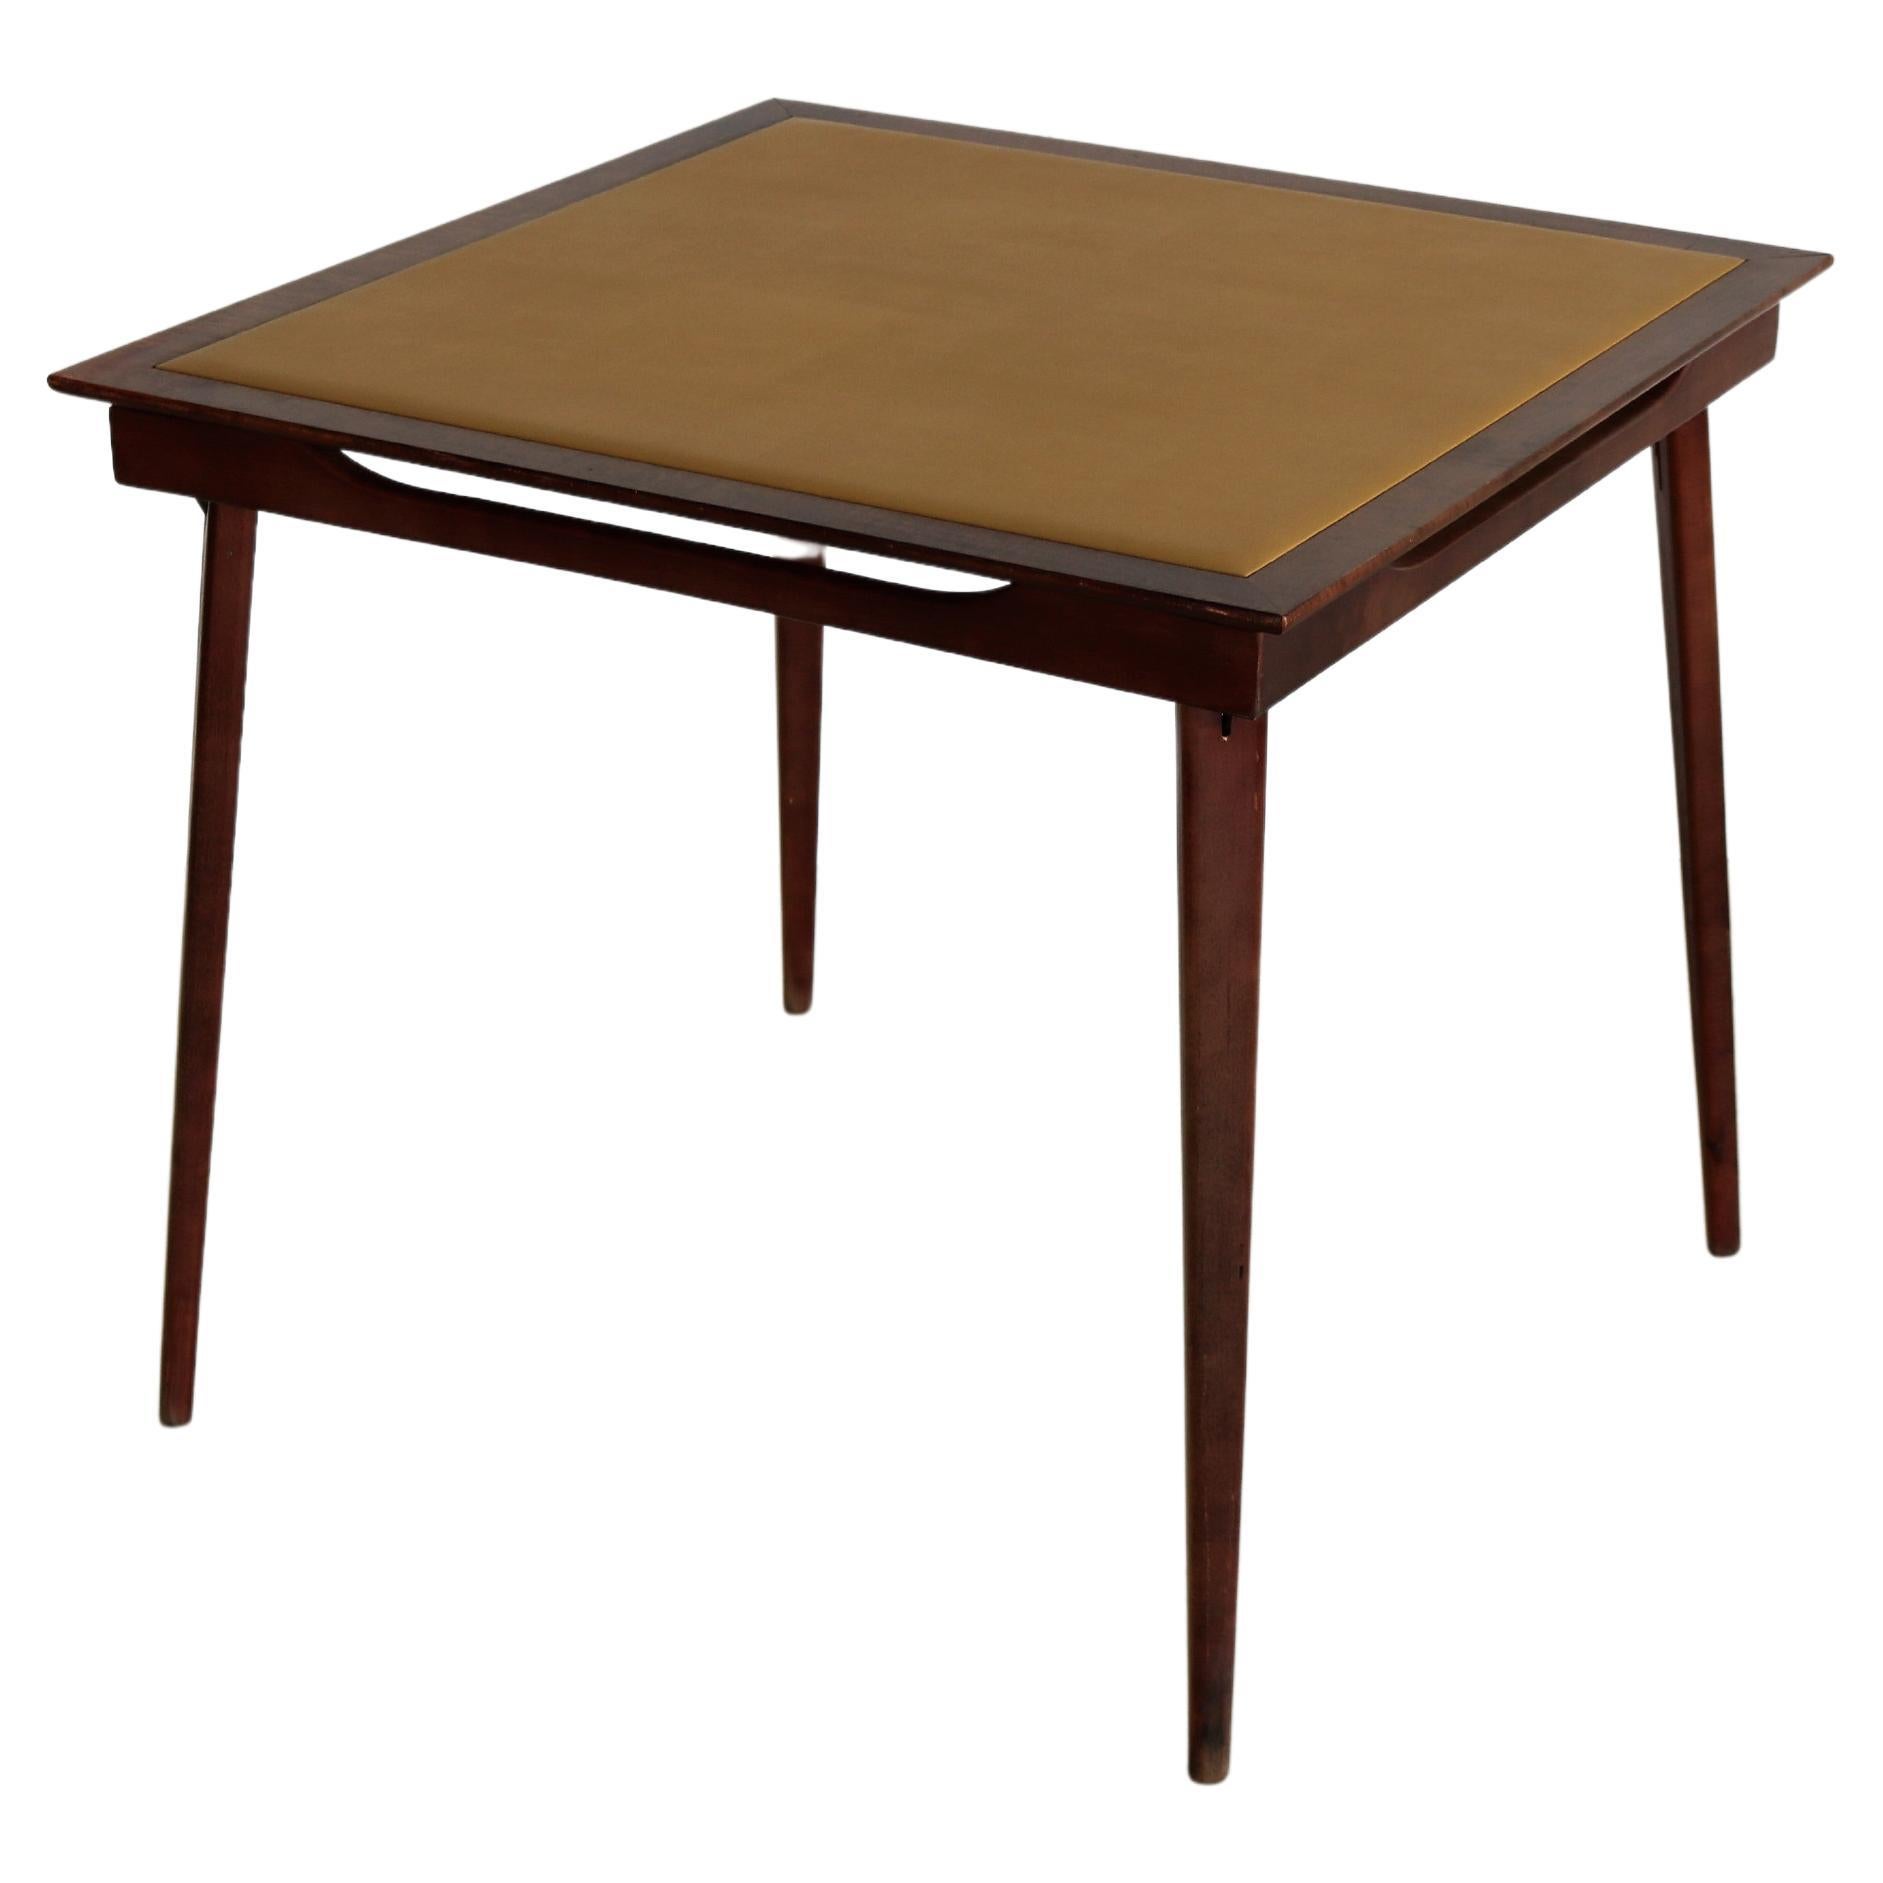 Vintage Foldable Table from Stakmore